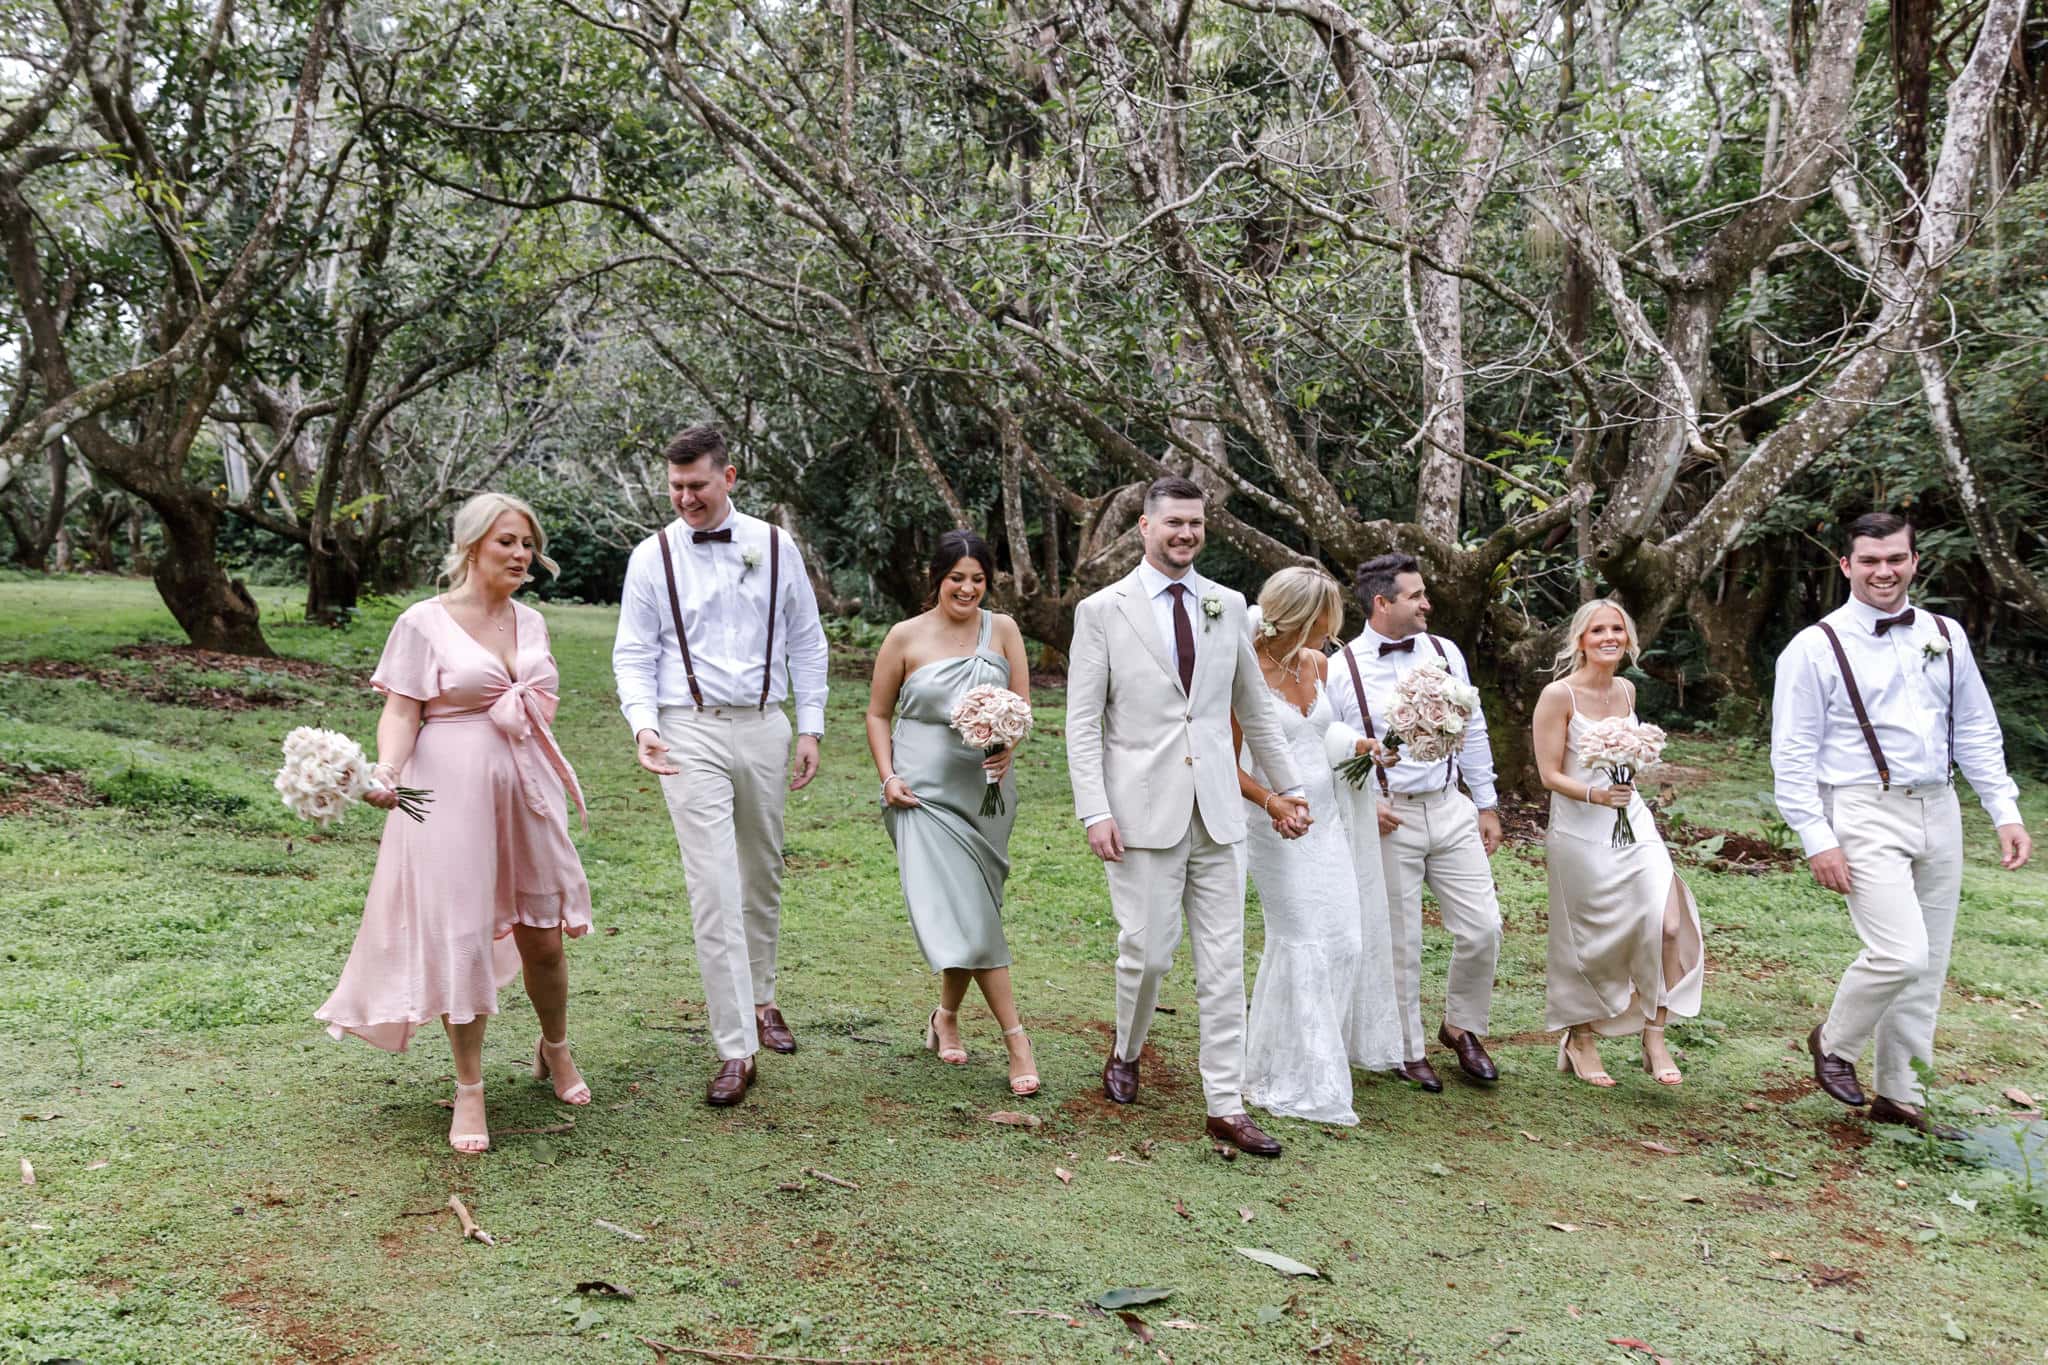 Wedding party photos at Pethers Rainforest Retreat by Mooi Photography.